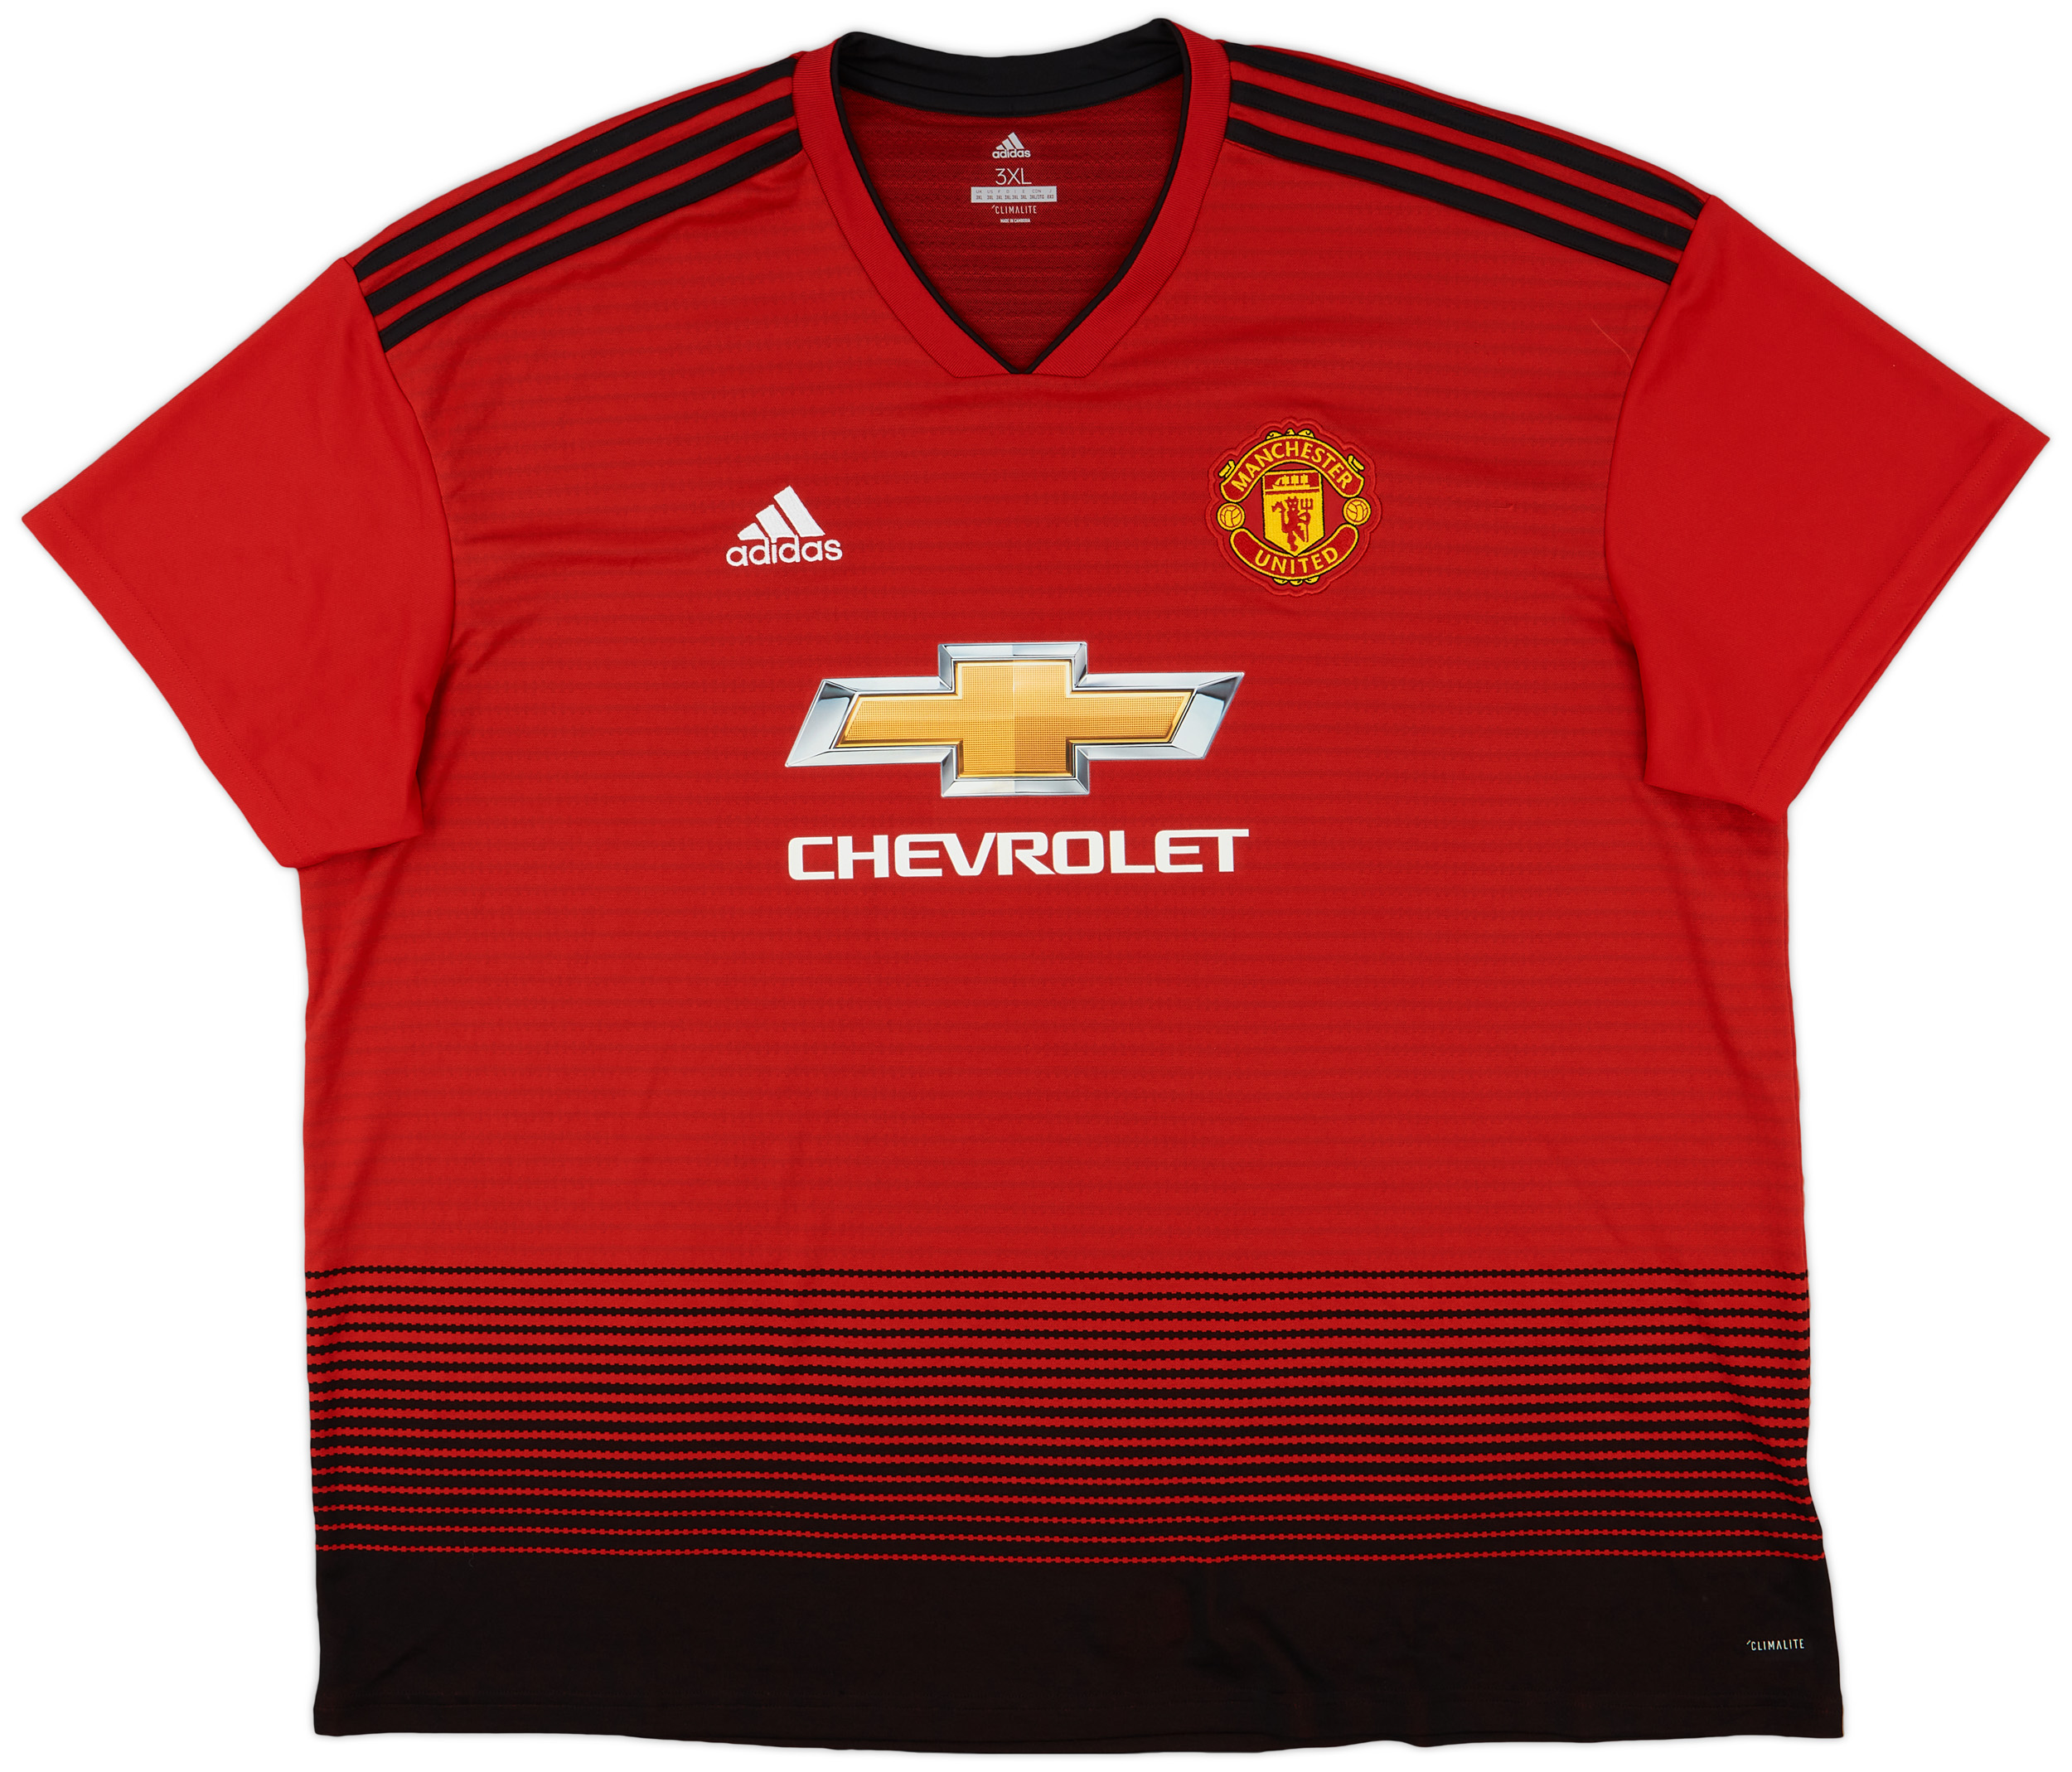 2018-19 Manchester United Home Shirt - 9/10 - ()